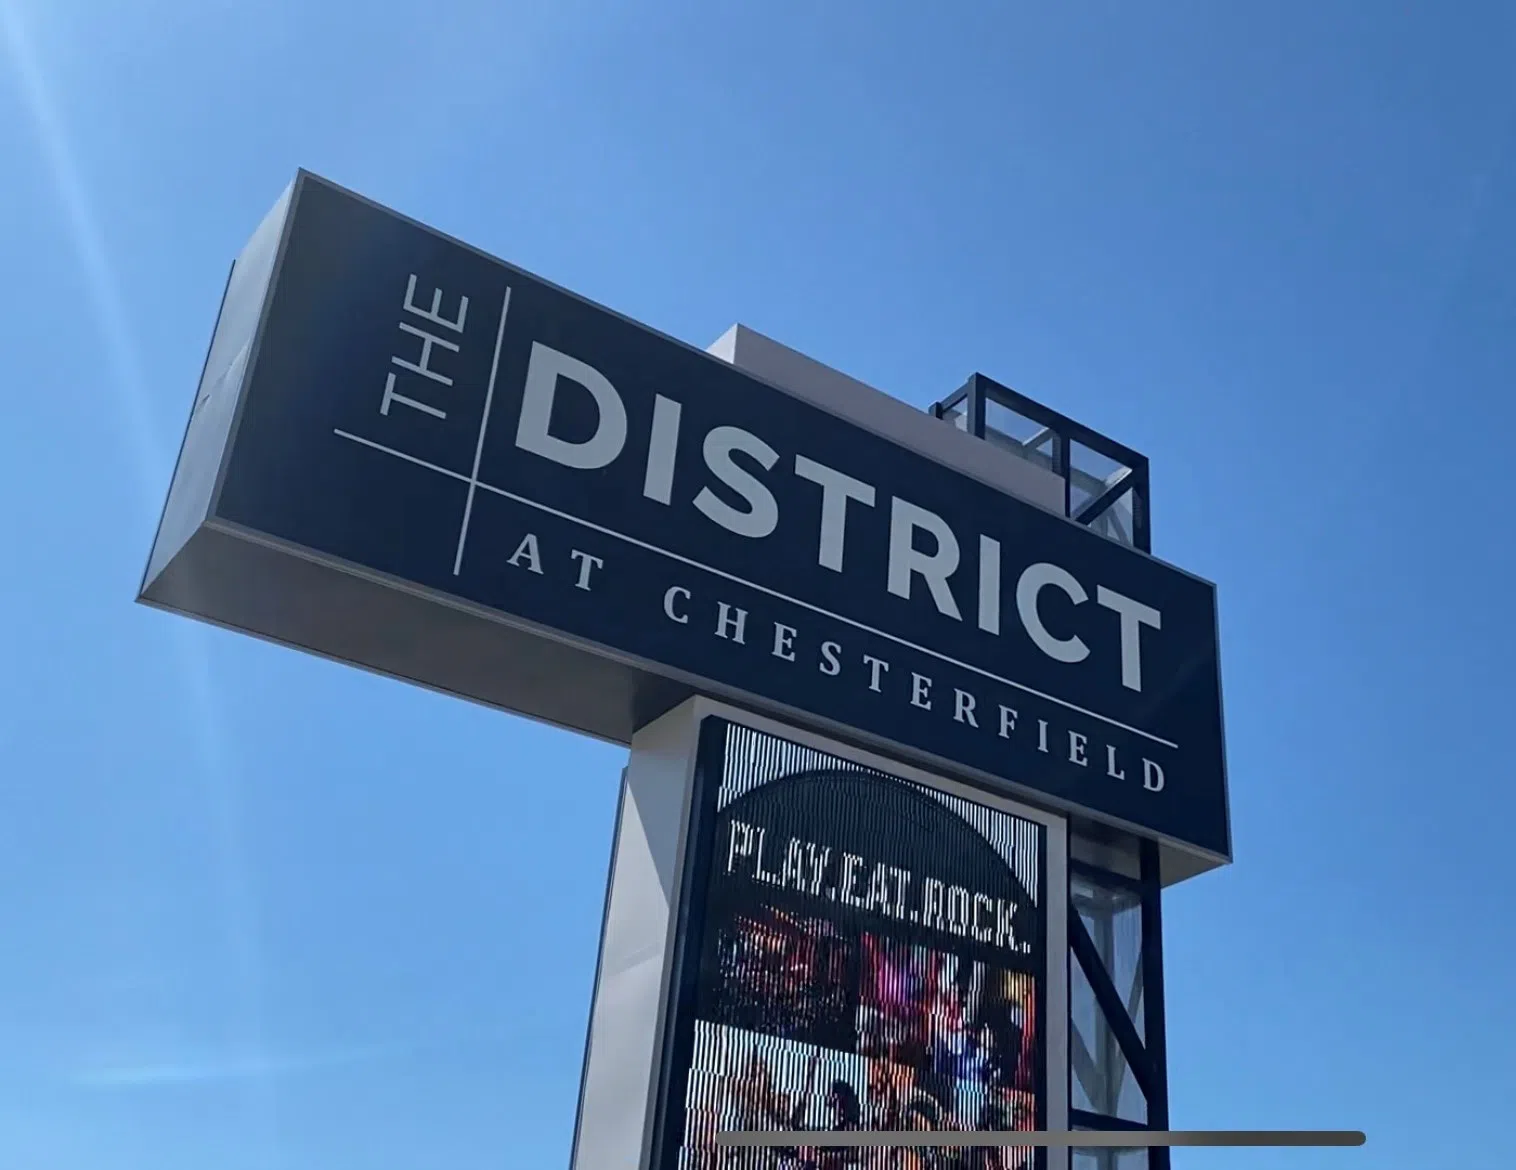 The sign welcoming people to The District.